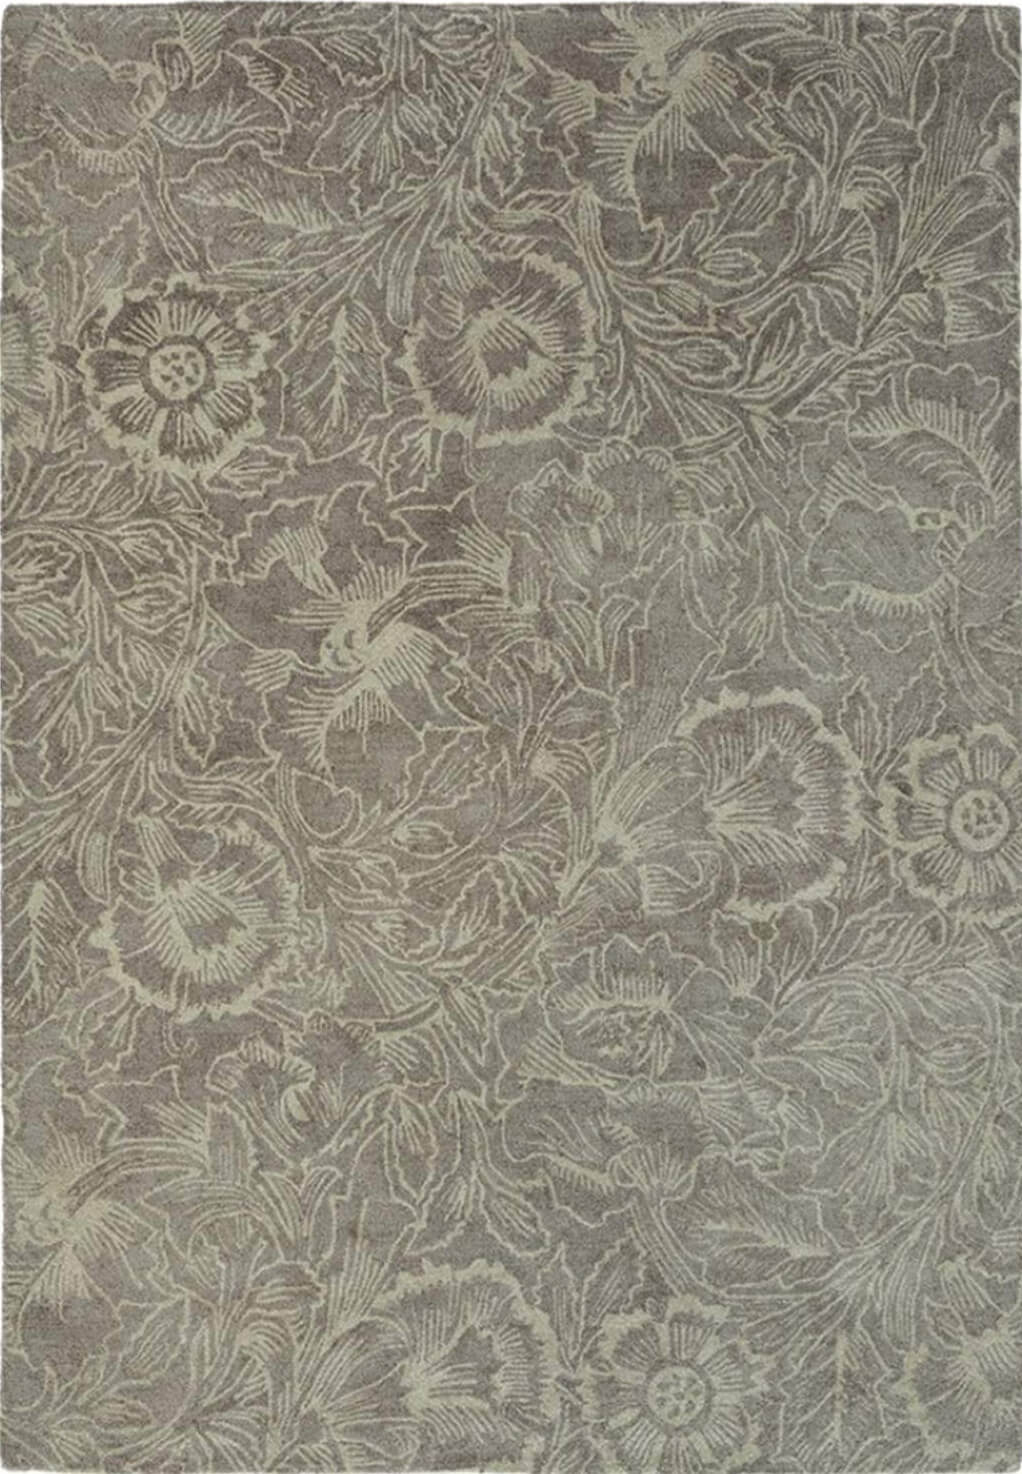 Poppy Taupe 28405 Rug by Brink & Campman ☞ Size: 200 x 280 cm